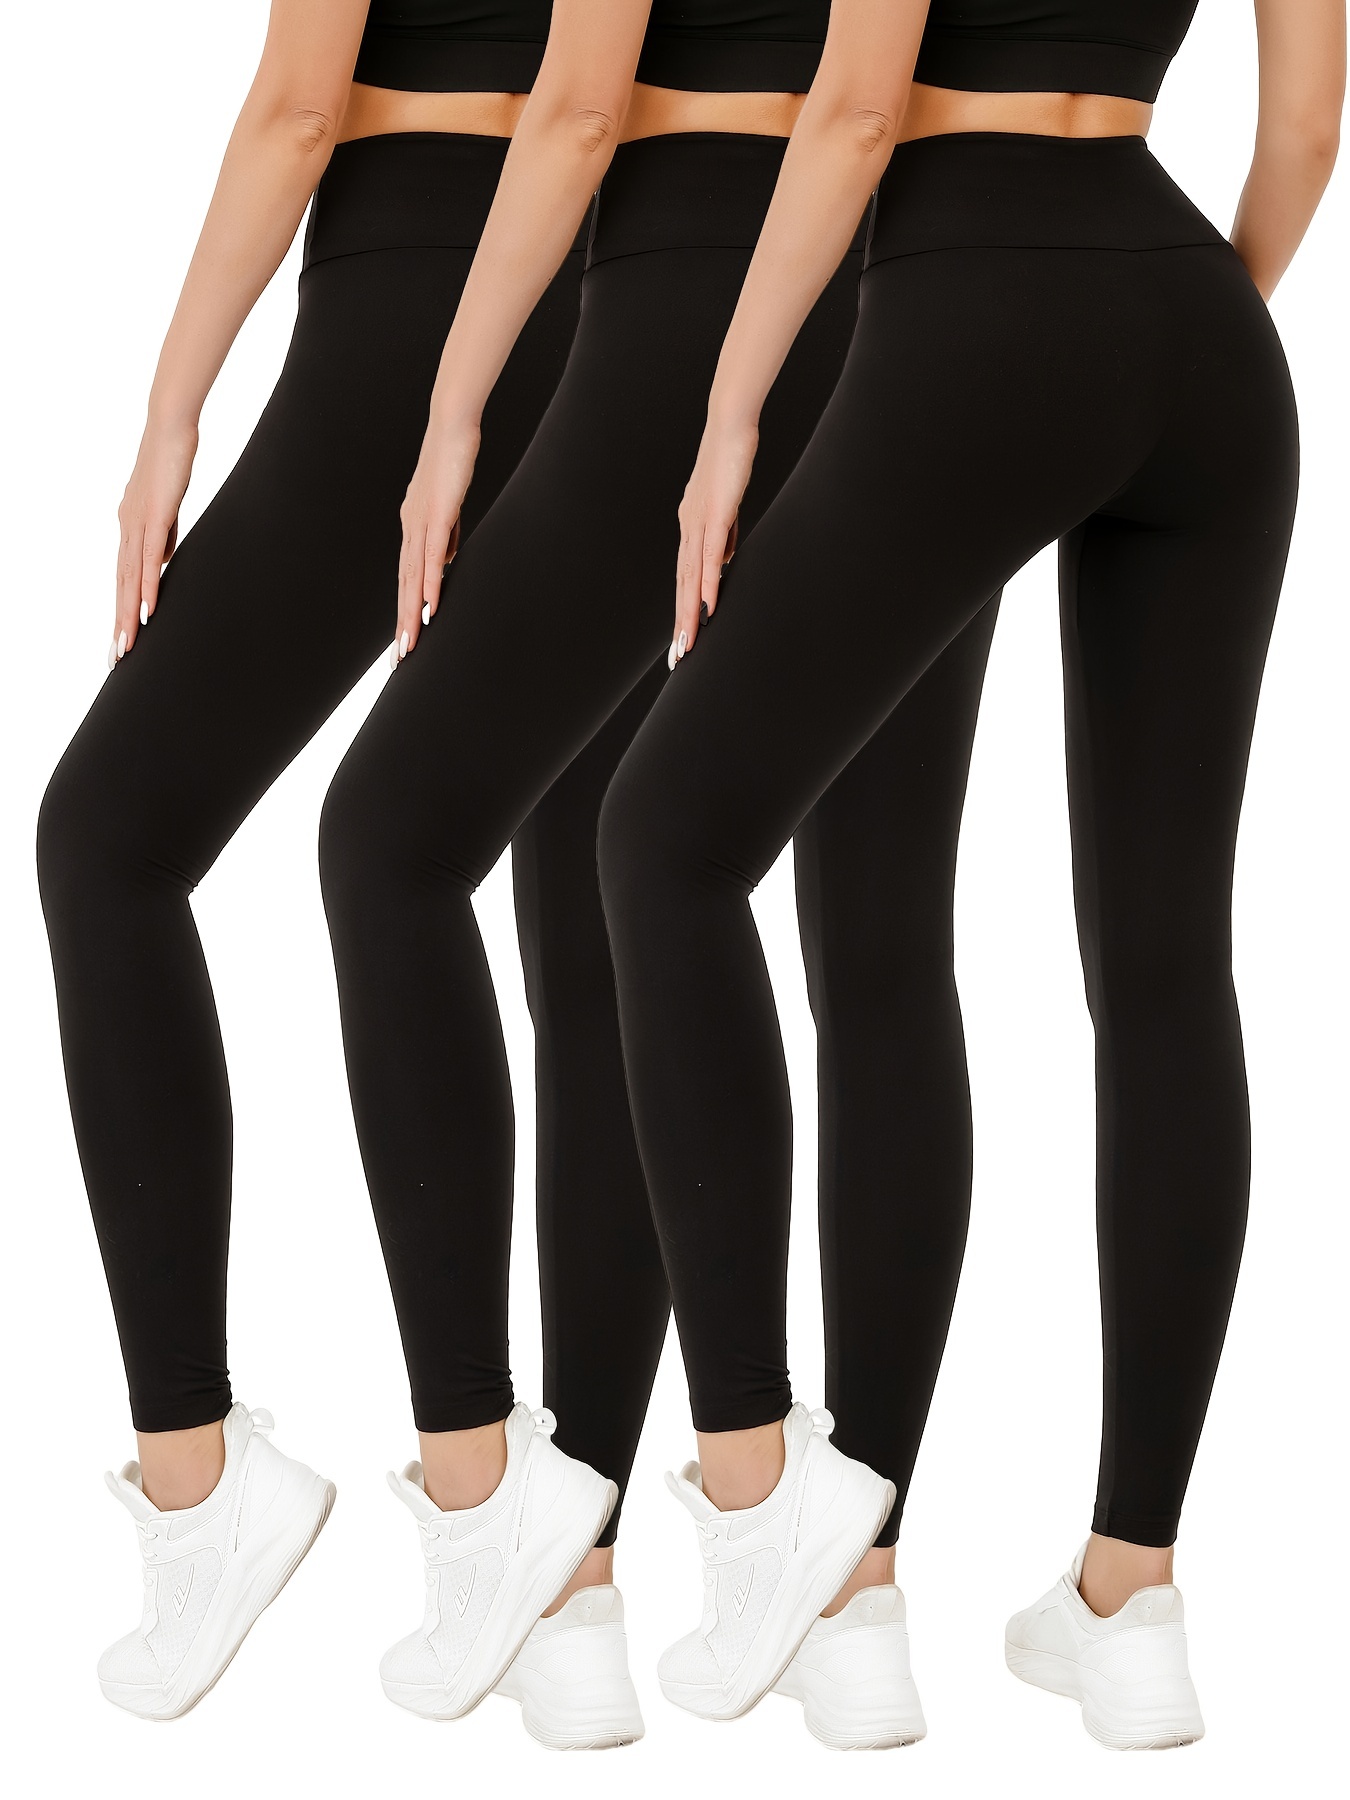 Buttery Soft Leggings for Women - High Waisted No See Through